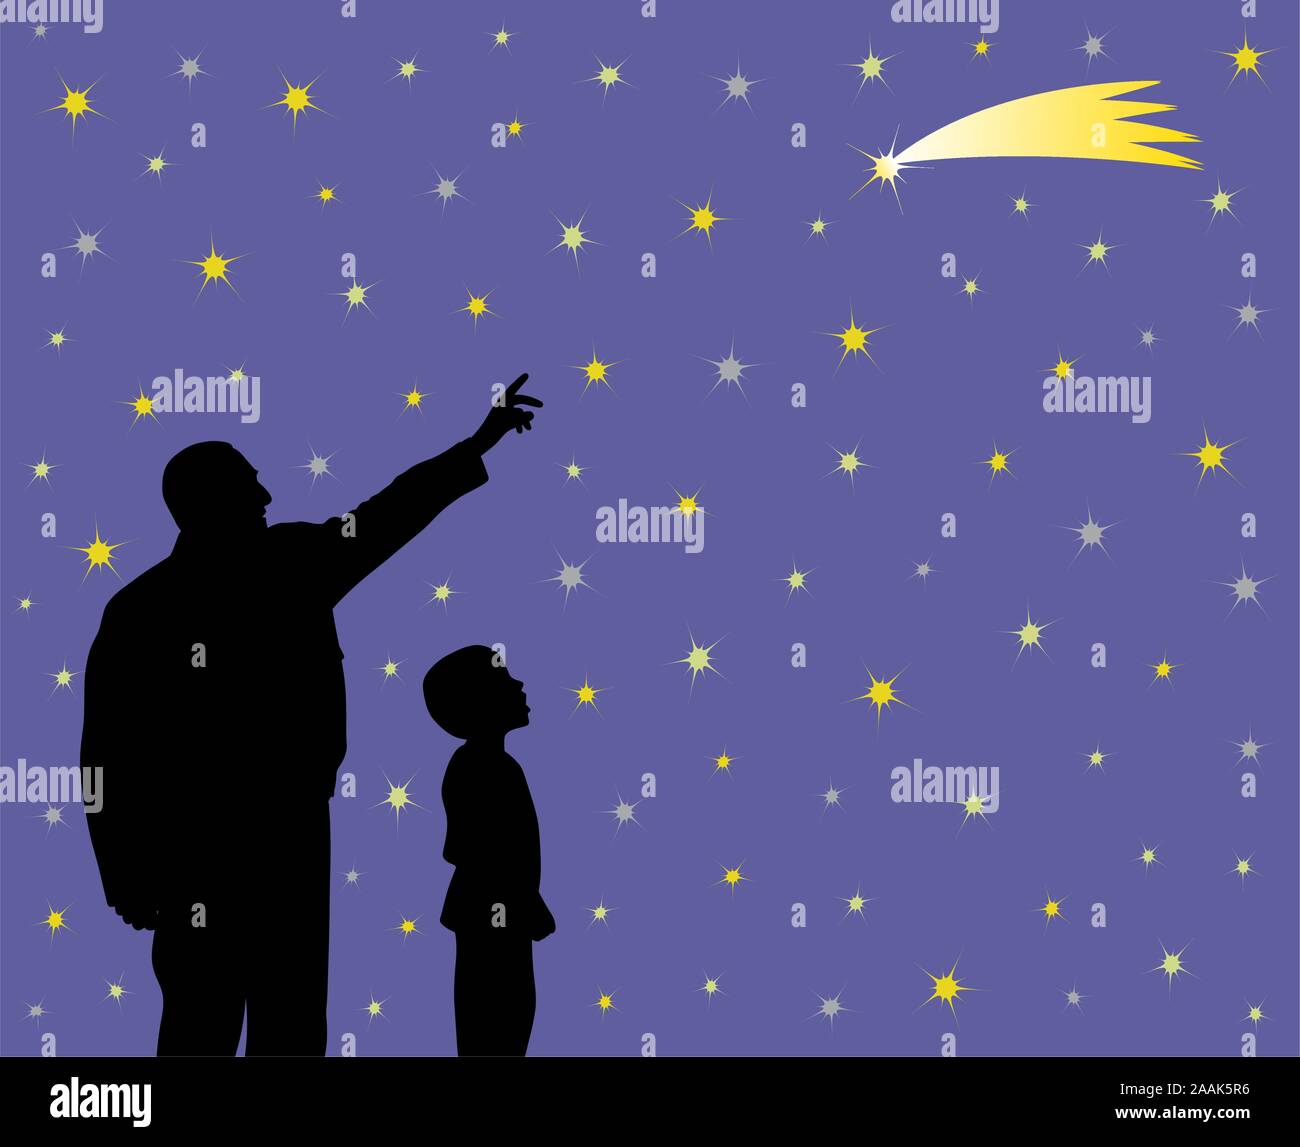 Father showing falling star to his amazed child. Father teaching kid about science, astronomy and his son can make a wish by seeing at shooting star. Stock Vector